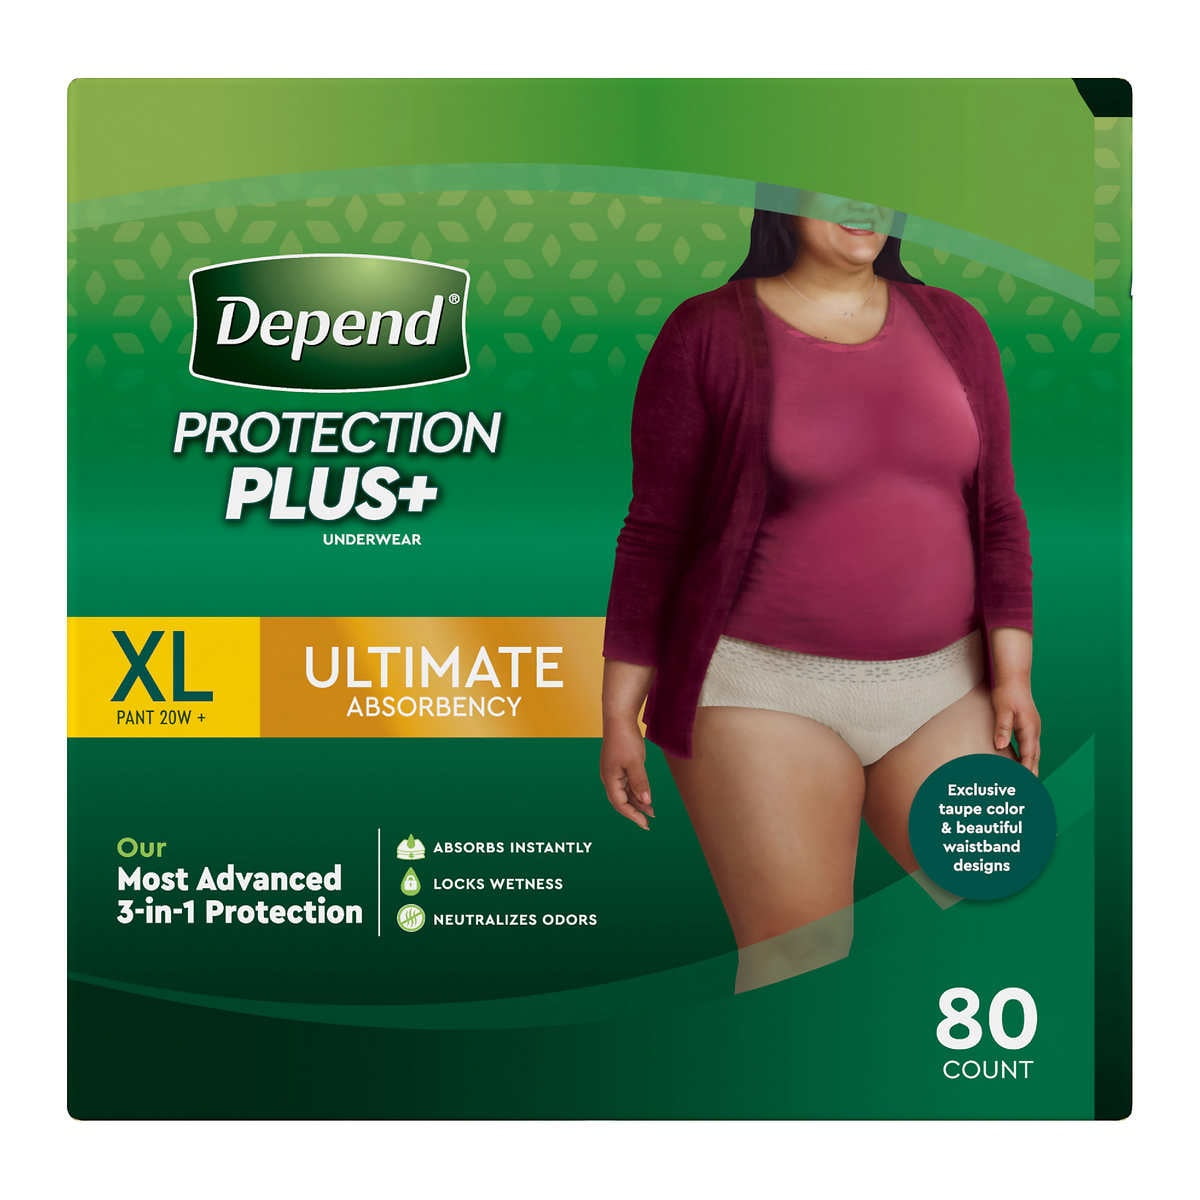 Attends Discreet Day or Night Extended Disposable Incontinence Underwear,  XL, 12 Count 